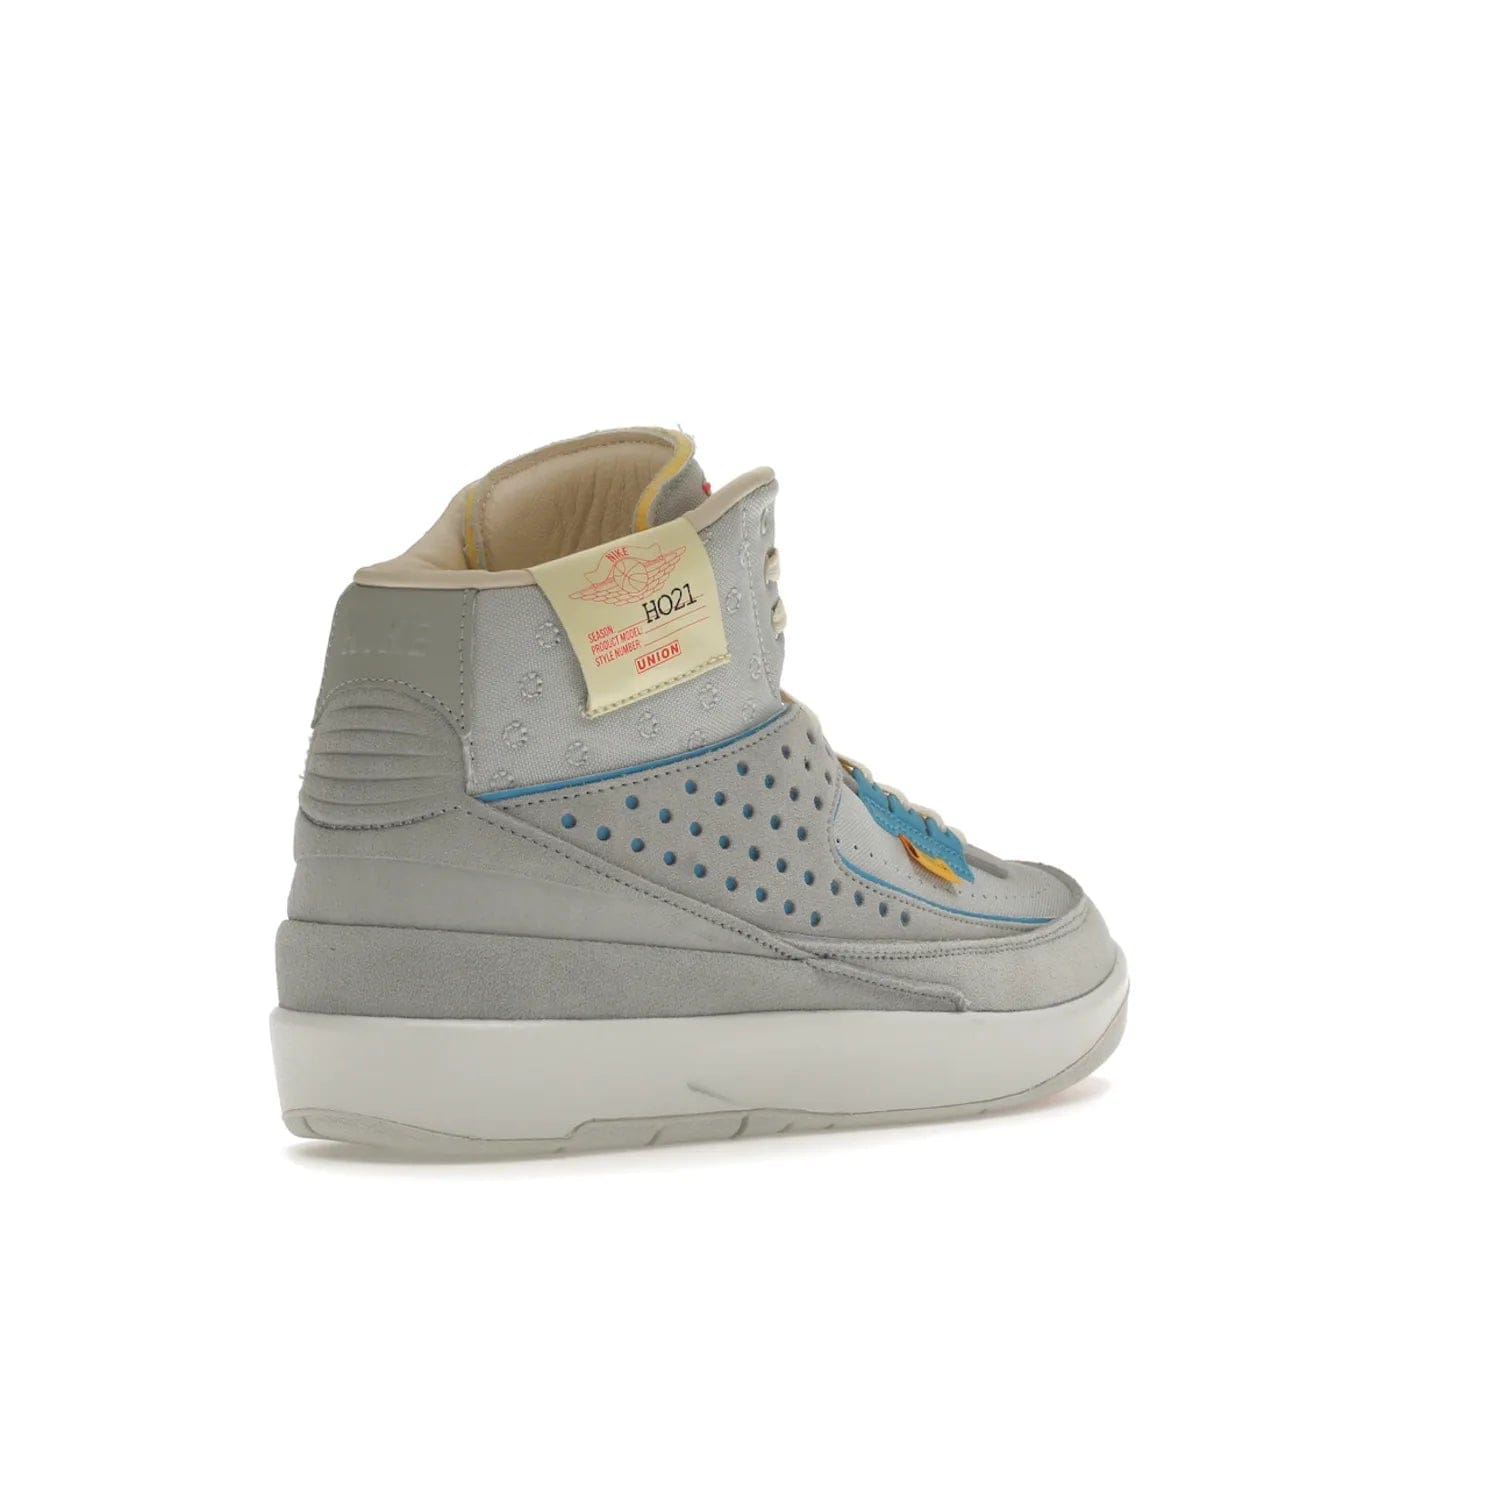 Jordan 2 Retro SP Union Grey Fog - Image 32 - Only at www.BallersClubKickz.com - Introducing the Air Jordan 2 Retro SP Union Grey Fog. This intricate sneaker design features a grey canvas upper with light blue eyelets, eyestay patches, and piping, plus custom external tags. Dropping in April 2022, this exclusive release offers a worn-in look and feel.